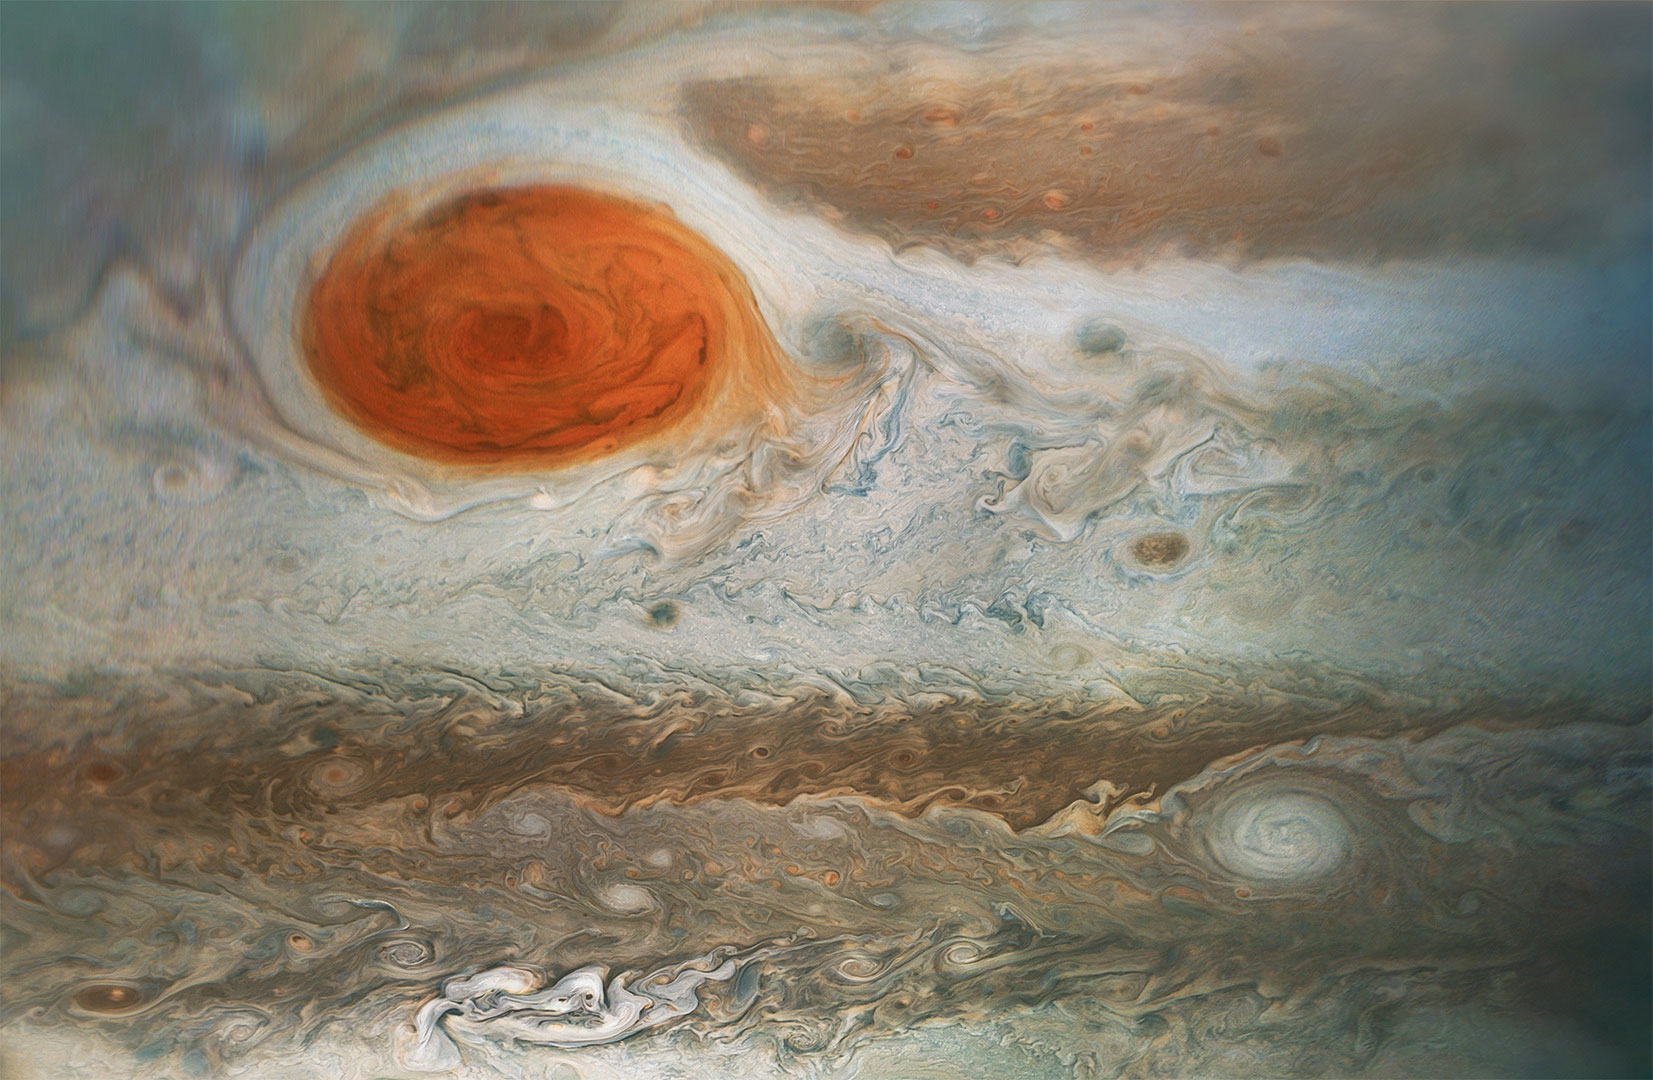 Juno Captures New Image of Jupiter’s Great Red Spot During ...